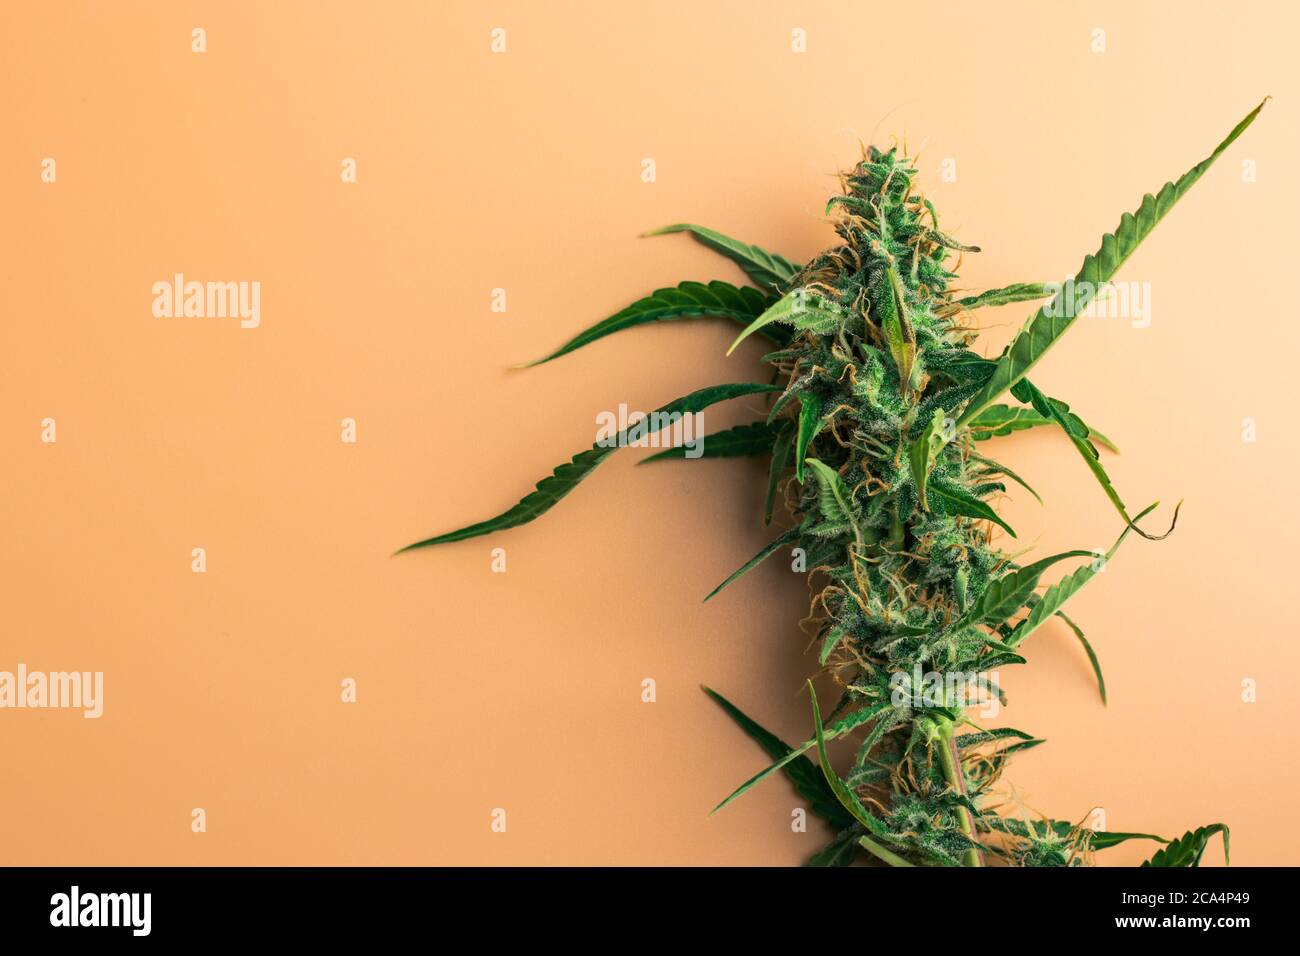 Marijuana plant buds with copy space. Cannabis leaves. Organic medical use concept Stock Photo